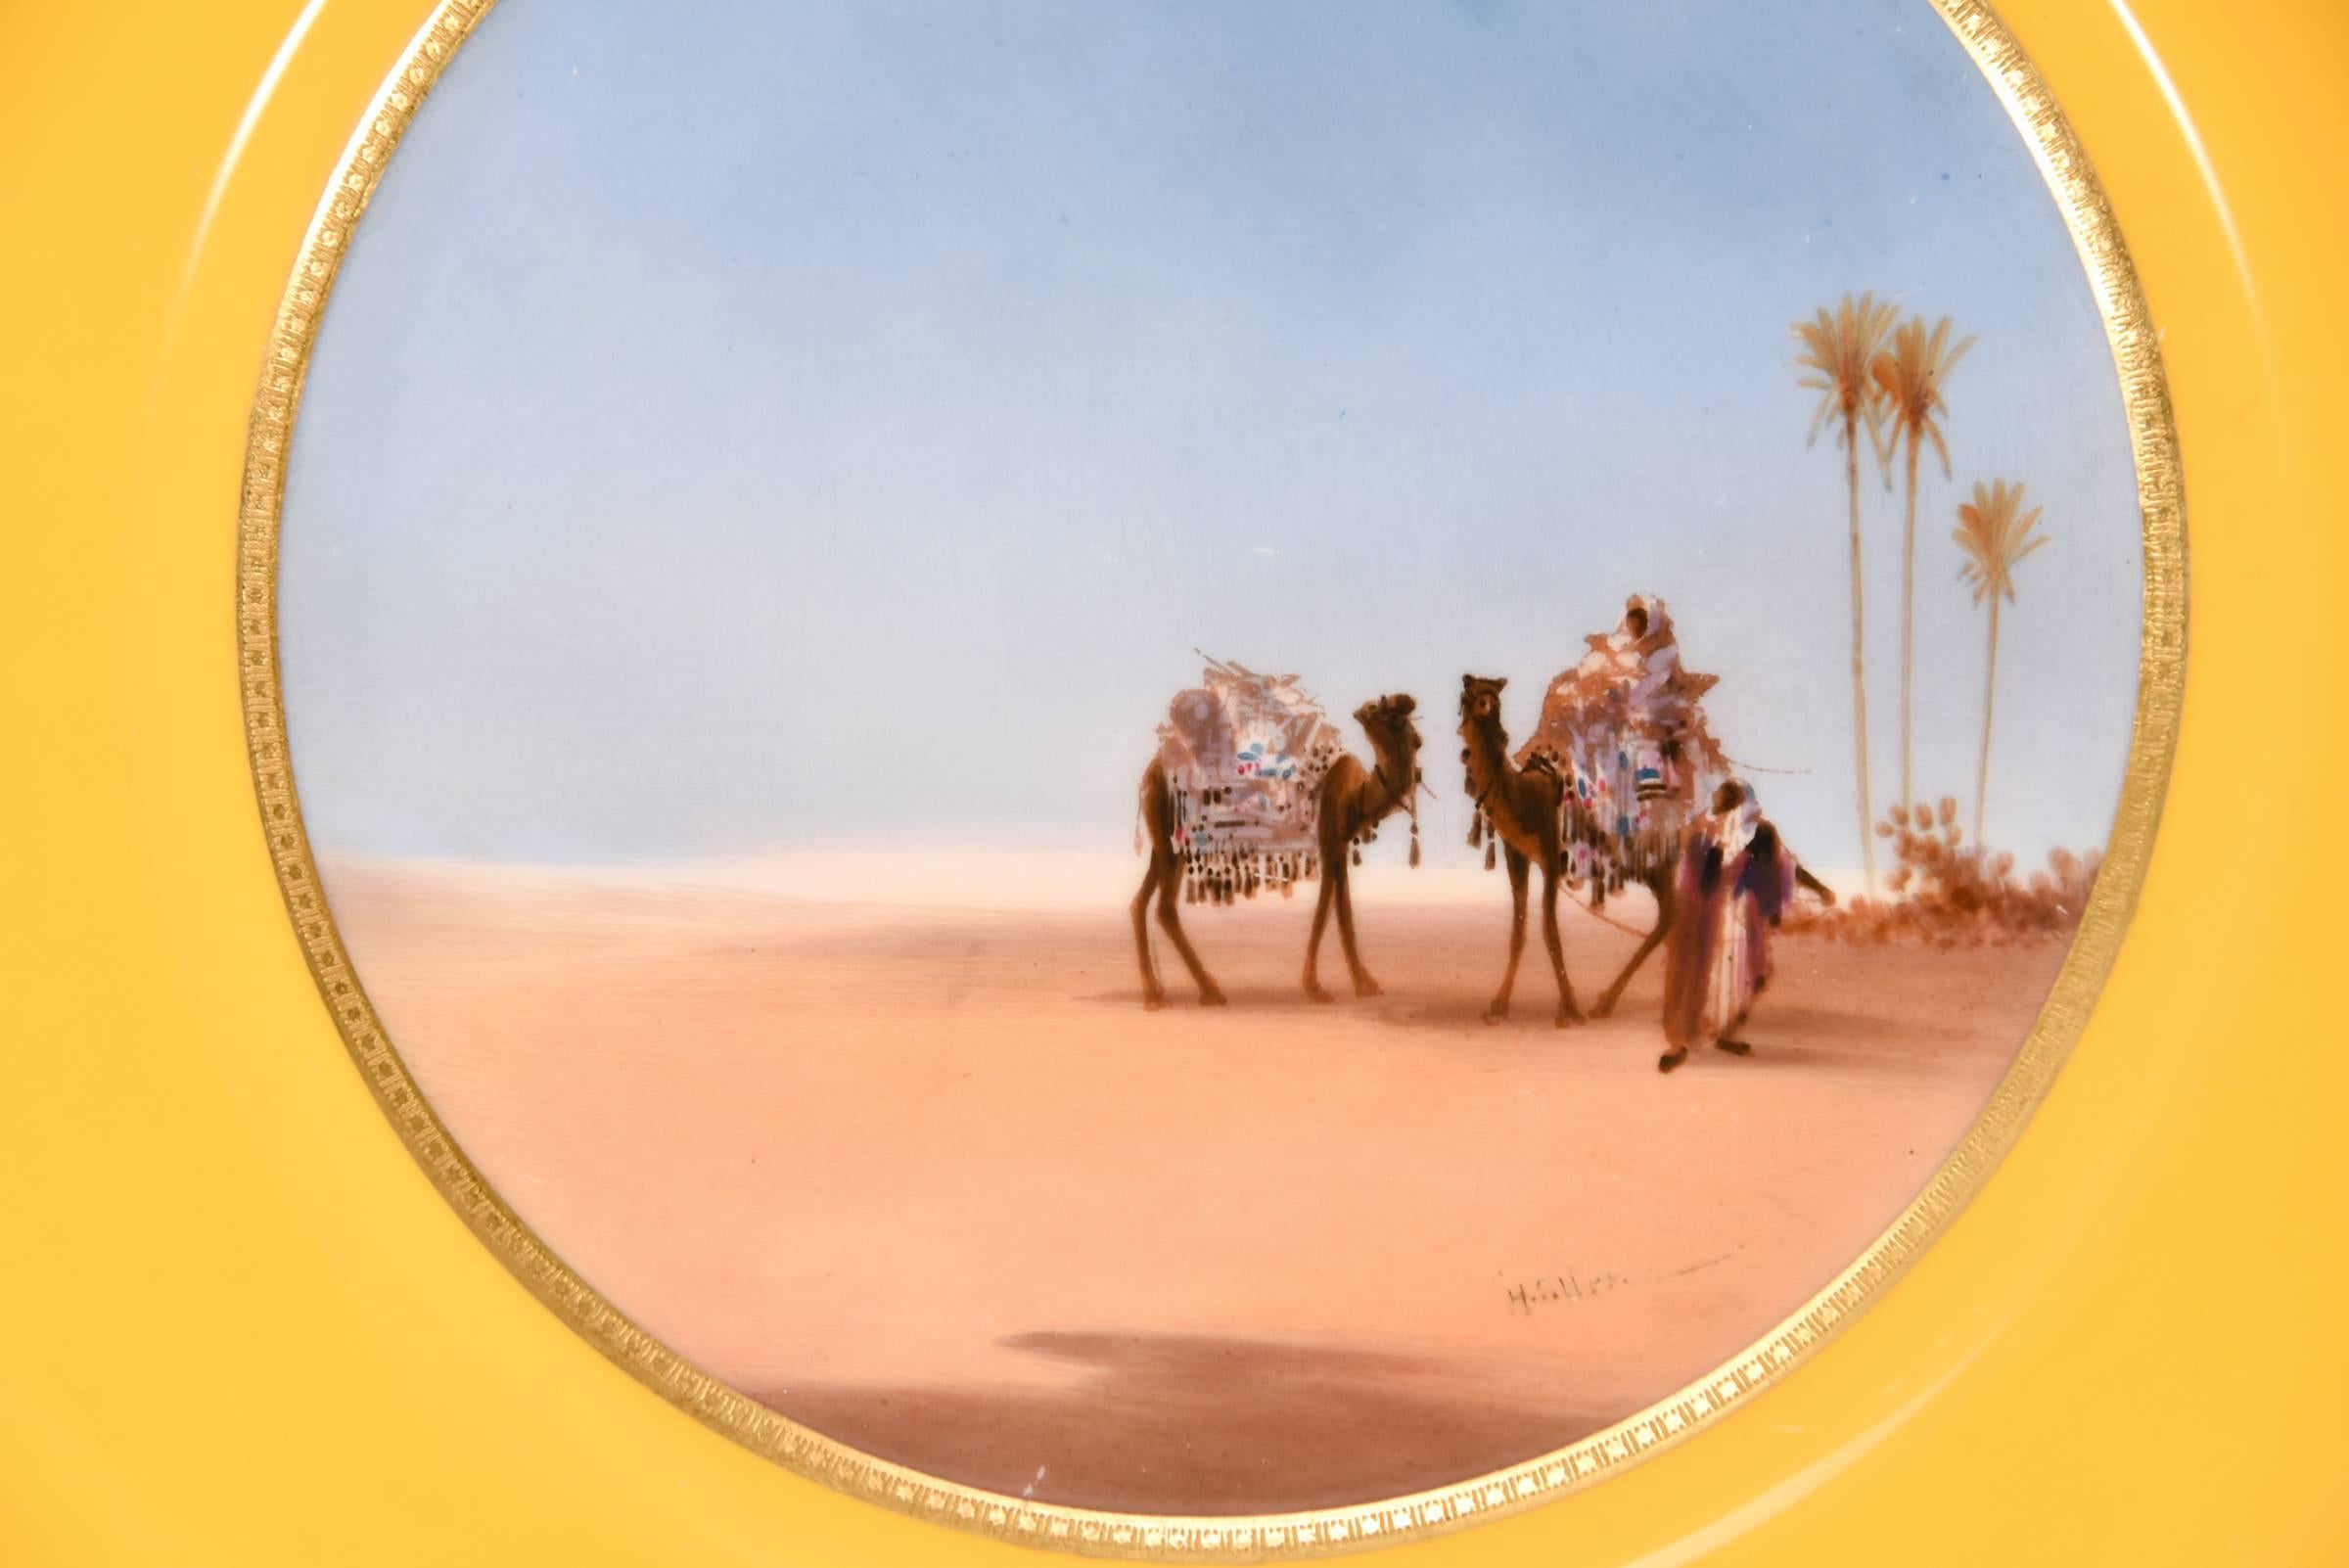 Early 20th Century 12 Royal Doulton Hand Painted Plates Signed H. Allen Desert Scenes with Camels